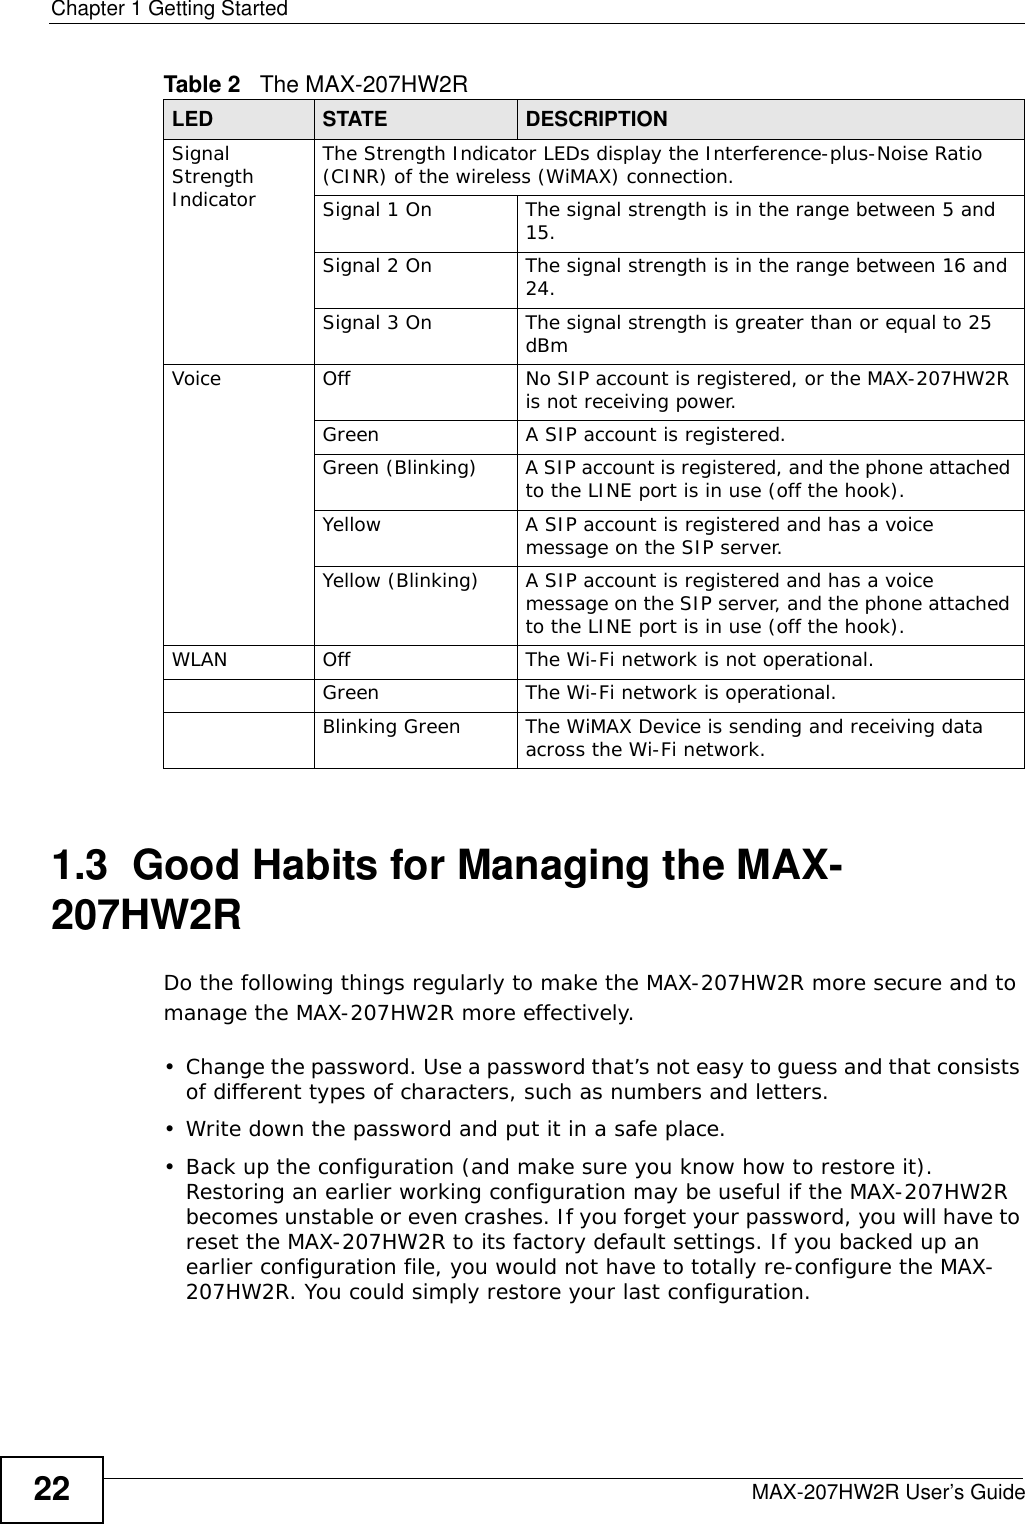 Chapter 1 Getting StartedMAX-207HW2R User’s Guide221.3  Good Habits for Managing the MAX-207HW2RDo the following things regularly to make the MAX-207HW2R more secure and to manage the MAX-207HW2R more effectively.• Change the password. Use a password that’s not easy to guess and that consists of different types of characters, such as numbers and letters.• Write down the password and put it in a safe place.• Back up the configuration (and make sure you know how to restore it). Restoring an earlier working configuration may be useful if the MAX-207HW2R becomes unstable or even crashes. If you forget your password, you will have to reset the MAX-207HW2R to its factory default settings. If you backed up an earlier configuration file, you would not have to totally re-configure the MAX-207HW2R. You could simply restore your last configuration.Signal Strength IndicatorThe Strength Indicator LEDs display the Interference-plus-Noise Ratio (CINR) of the wireless (WiMAX) connection.Signal 1 On The signal strength is in the range between 5 and 15.Signal 2 On The signal strength is in the range between 16 and 24.Signal 3 On The signal strength is greater than or equal to 25 dBmVoice Off No SIP account is registered, or the MAX-207HW2R is not receiving power.Green A SIP account is registered.Green (Blinking) A SIP account is registered, and the phone attached to the LINE port is in use (off the hook).Yellow A SIP account is registered and has a voice message on the SIP server.Yellow (Blinking) A SIP account is registered and has a voice message on the SIP server, and the phone attached to the LINE port is in use (off the hook).WLAN Off The Wi-Fi network is not operational.Green The Wi-Fi network is operational.Blinking Green The WiMAX Device is sending and receiving data across the Wi-Fi network.Table 2   The MAX-207HW2RLED STATE DESCRIPTION